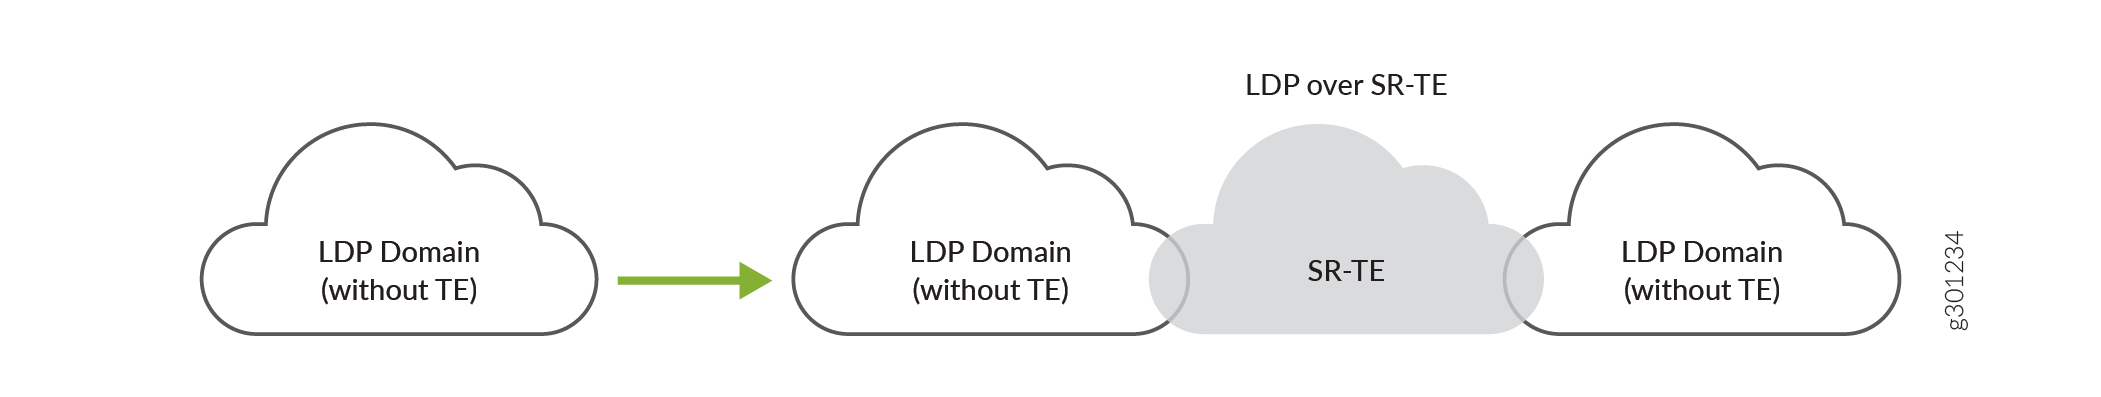 Interconnect LDP Domains over SR-TE in the Core Network